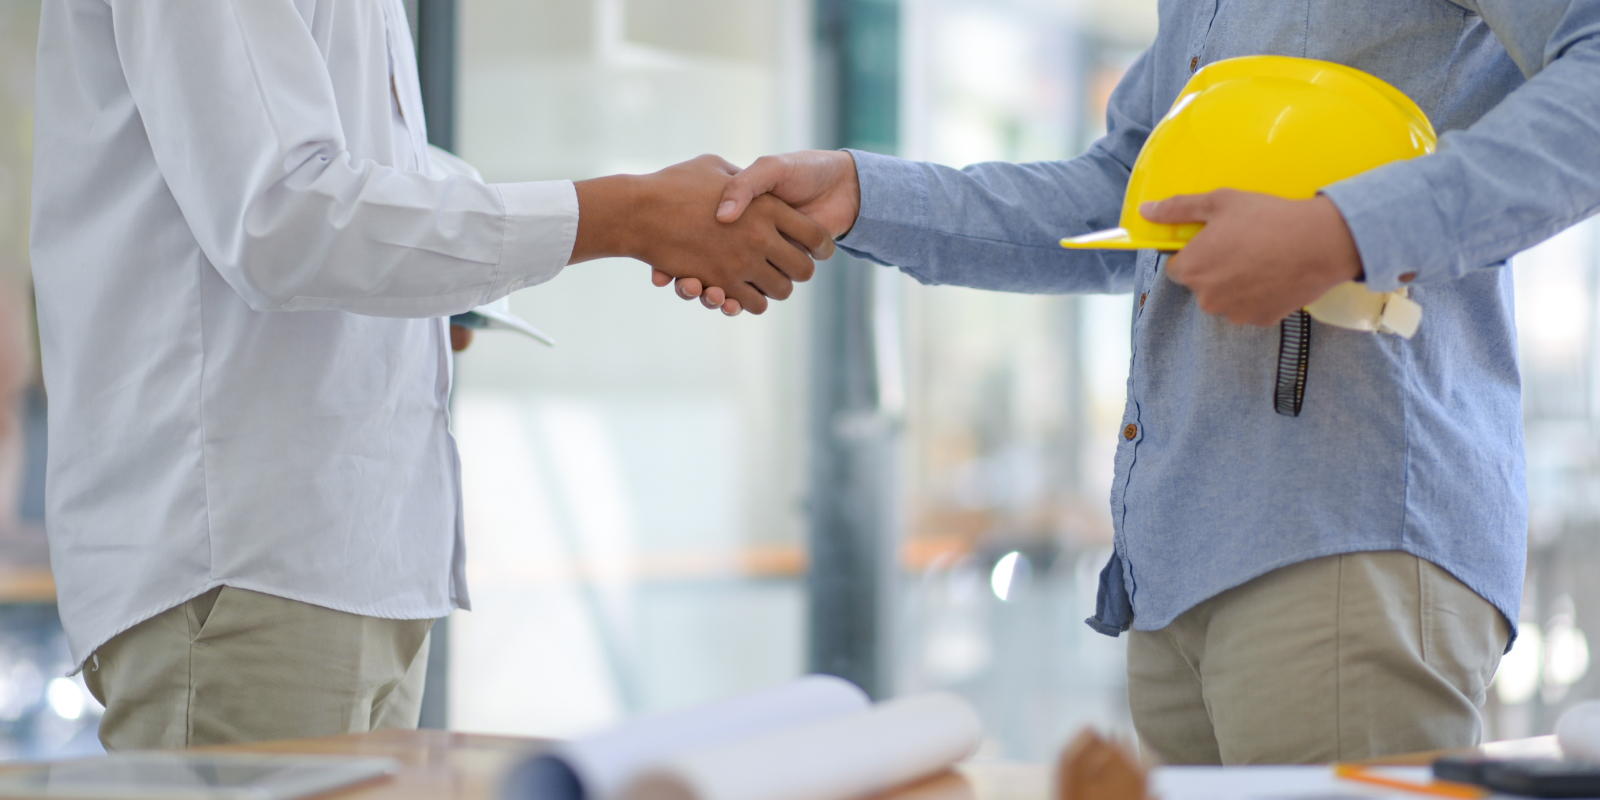 General contractor shaking hands and sealing a business deal.